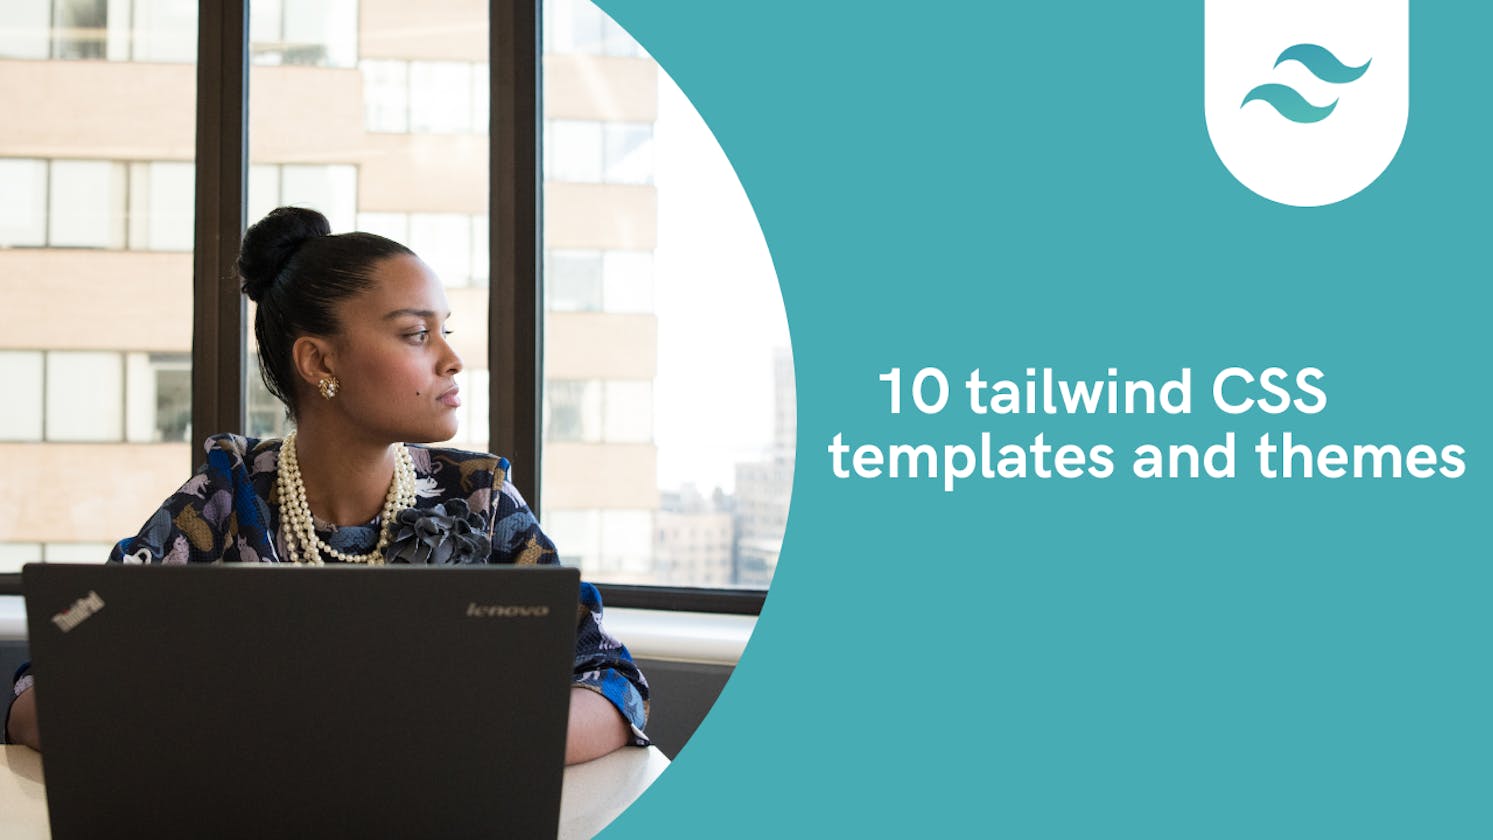 10 tailwind CSS templates and themes